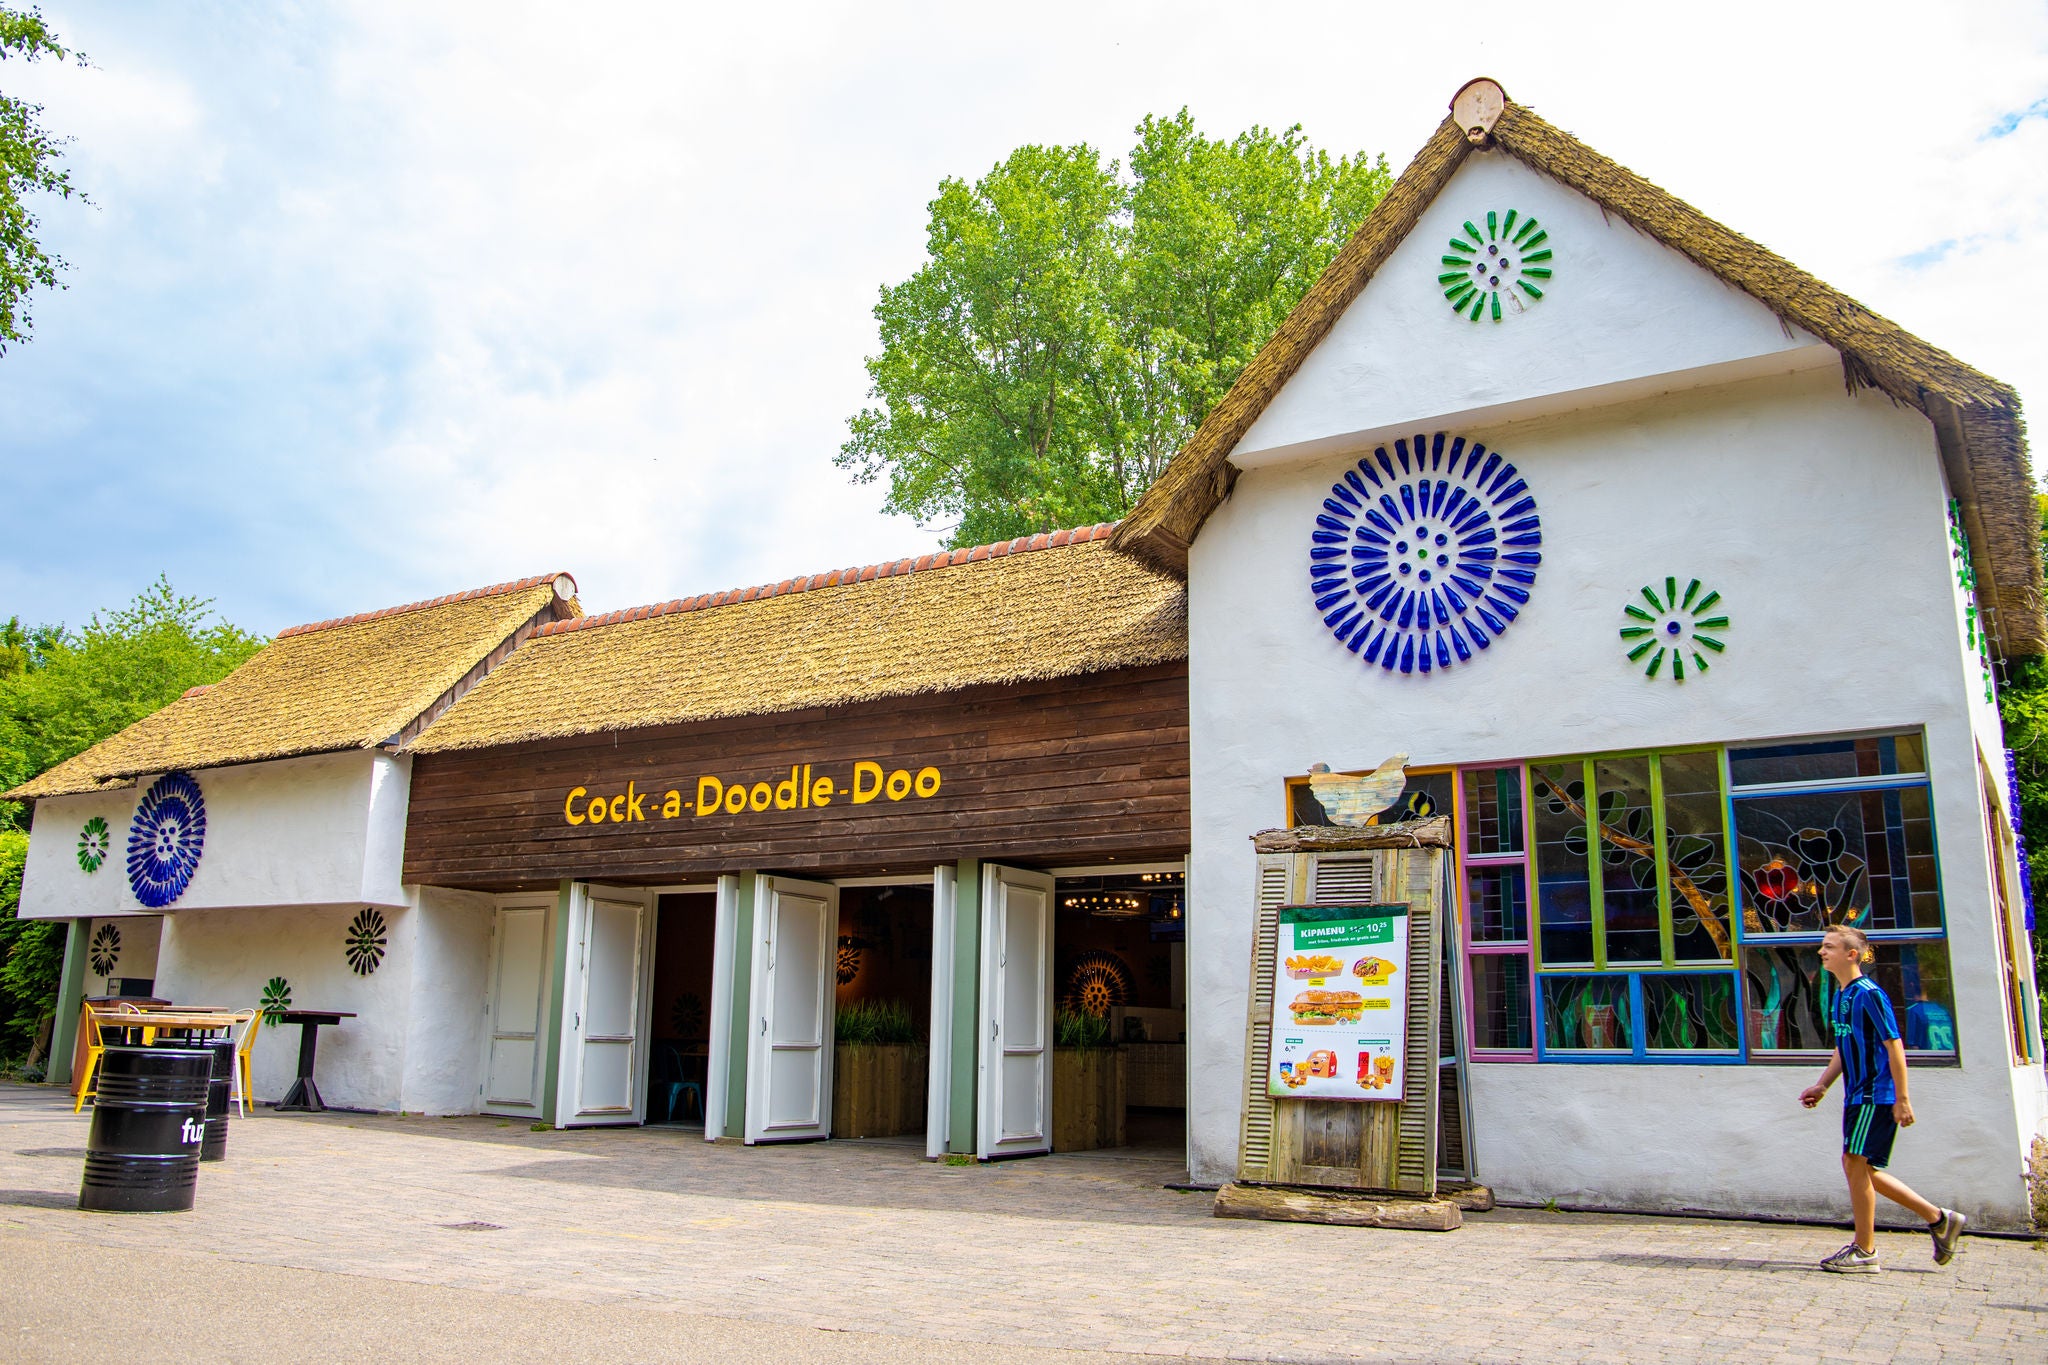 The entrance of the restaurant cock-a-doodle-doo at walibi 